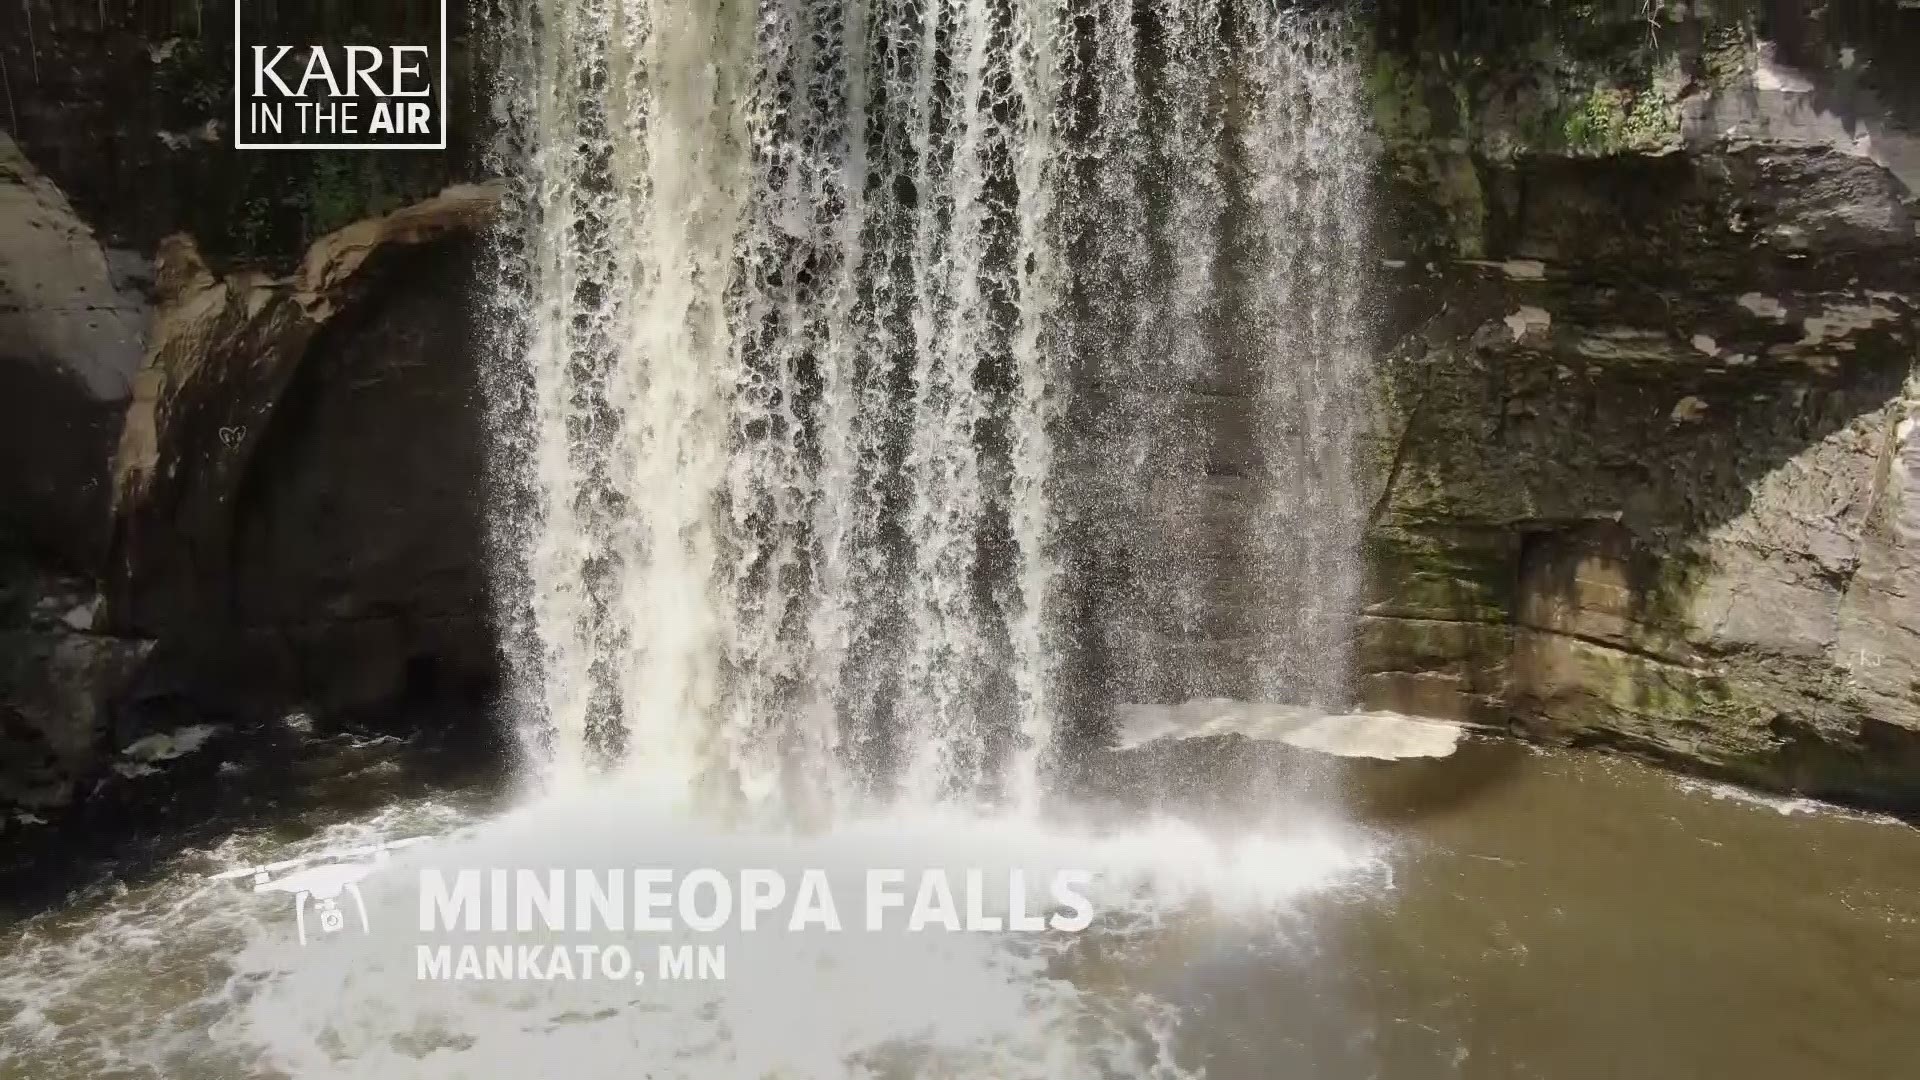 Our summer drone series will give you a bird's eye view of some of the most beautiful and iconic locations in Minnesota.